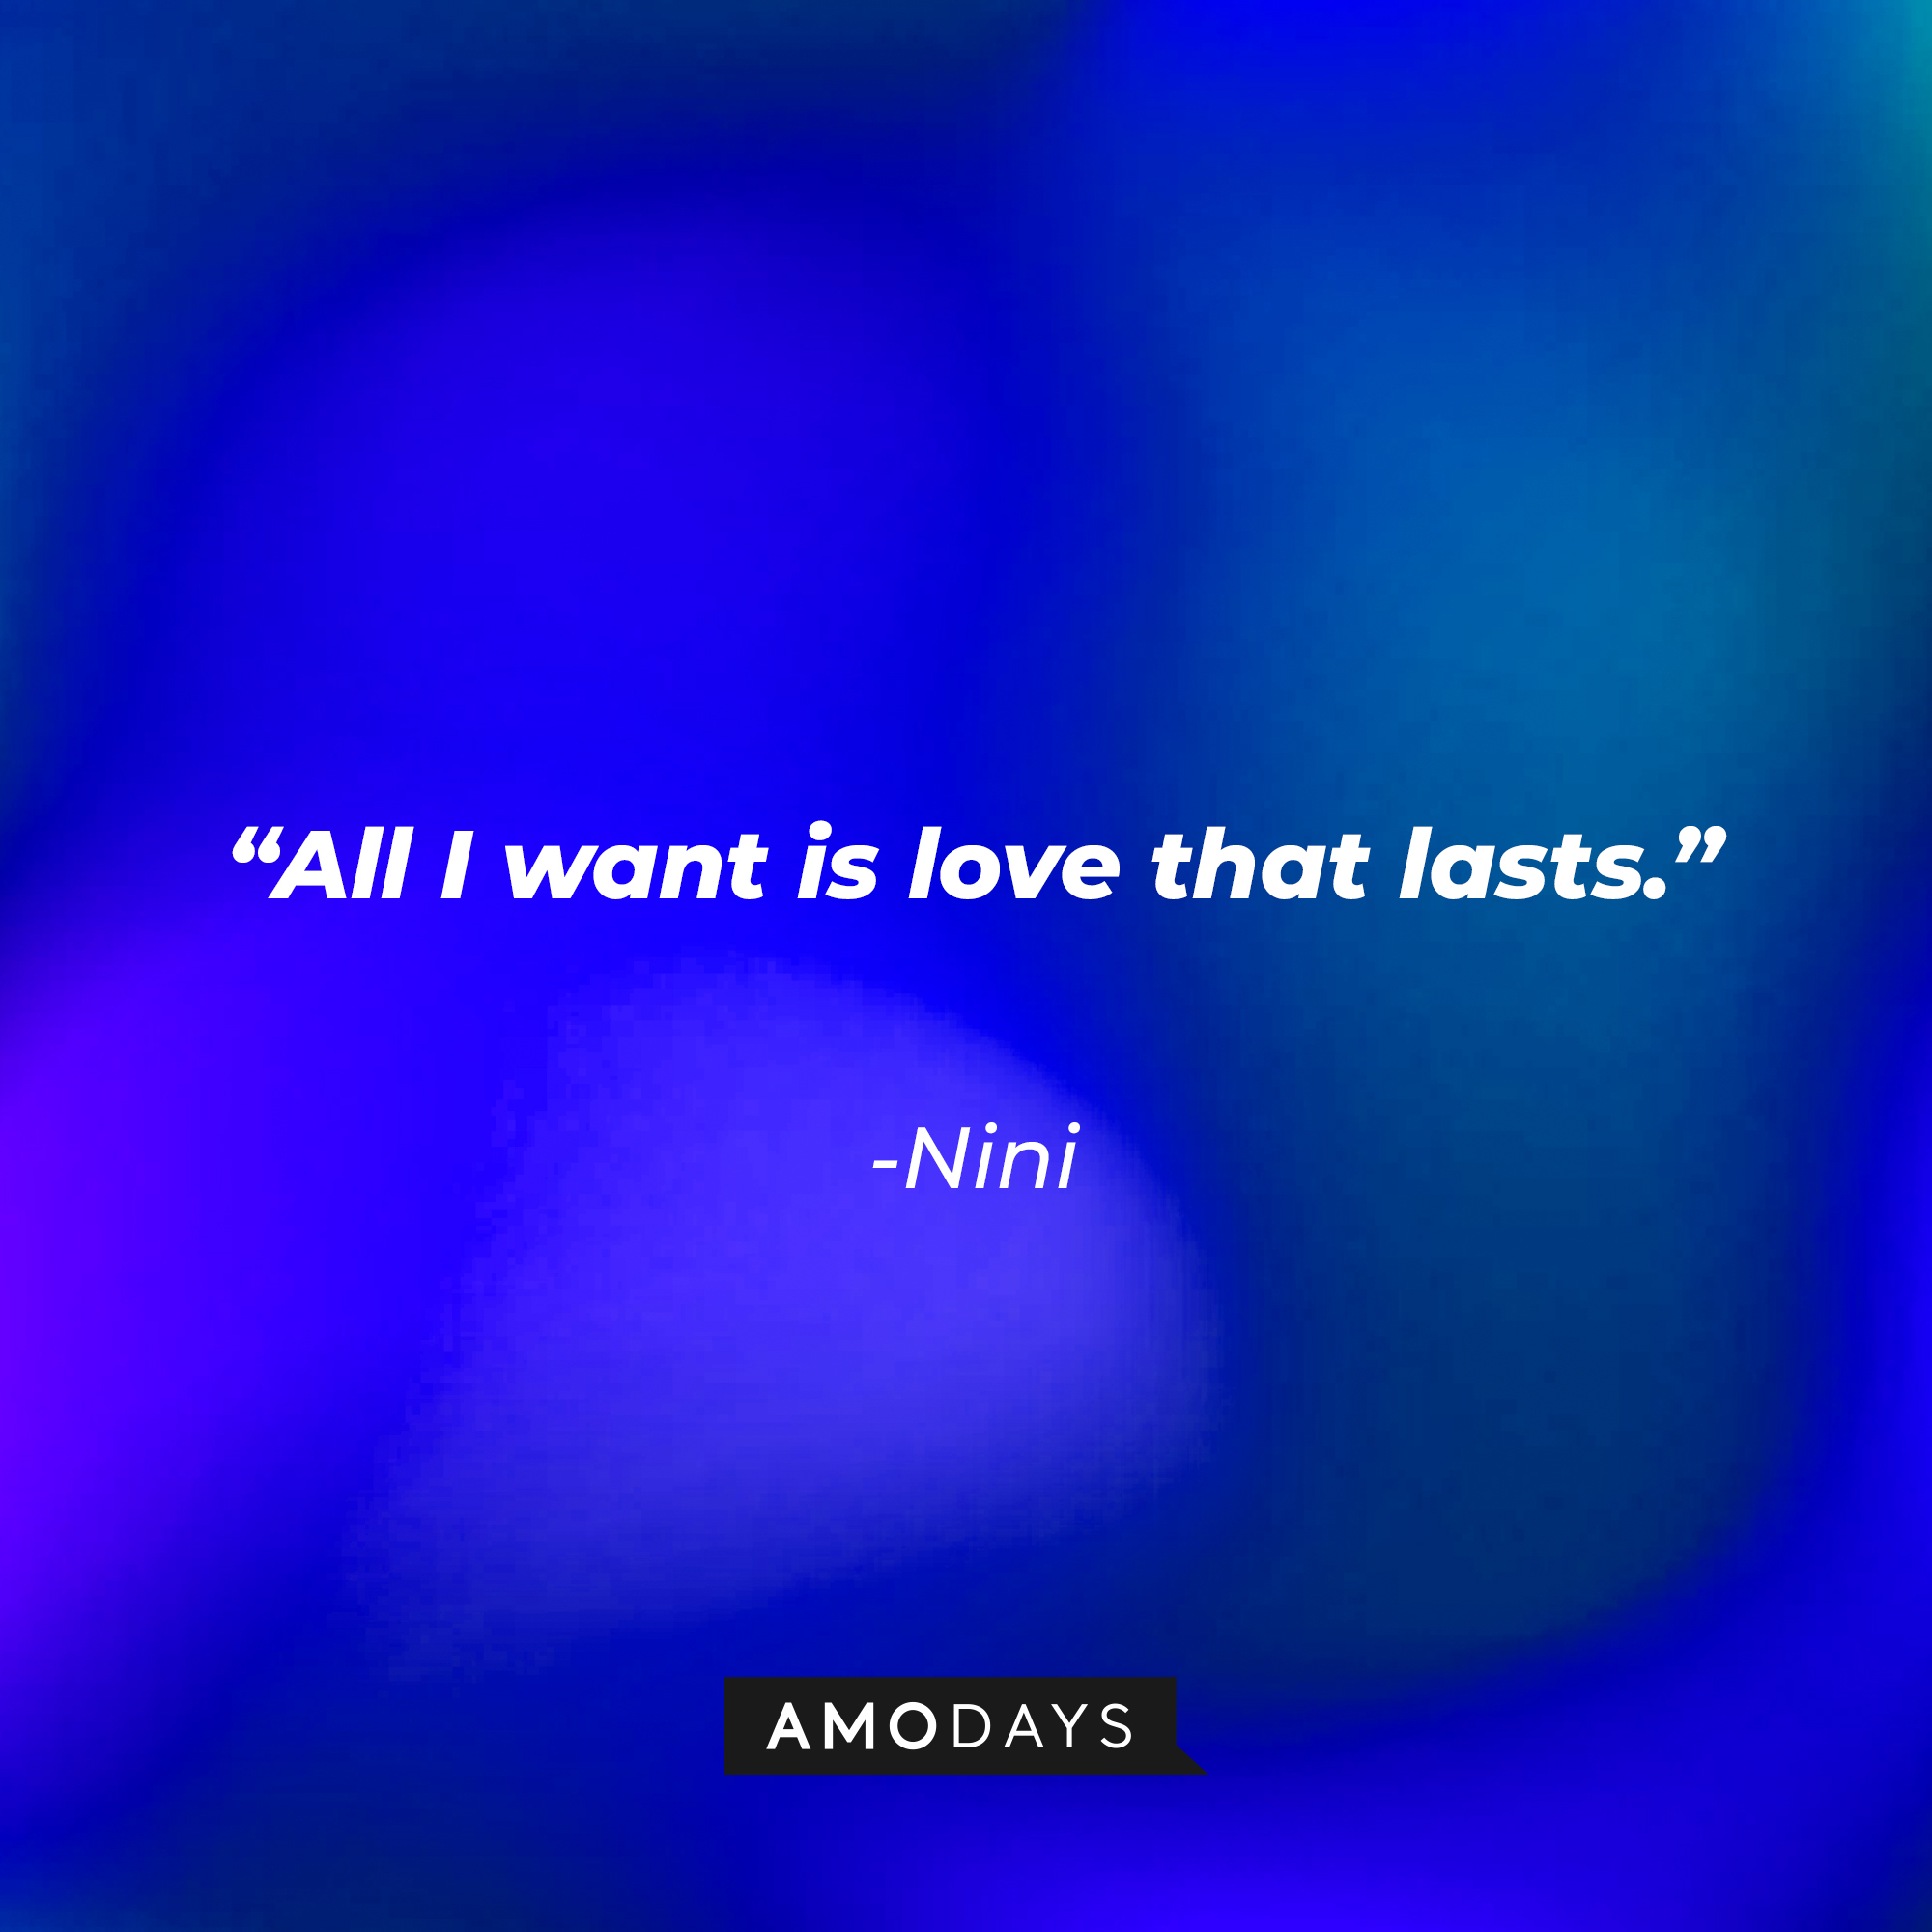 Nini’s quote: "All I want is love that lasts." | Source: AmoDays